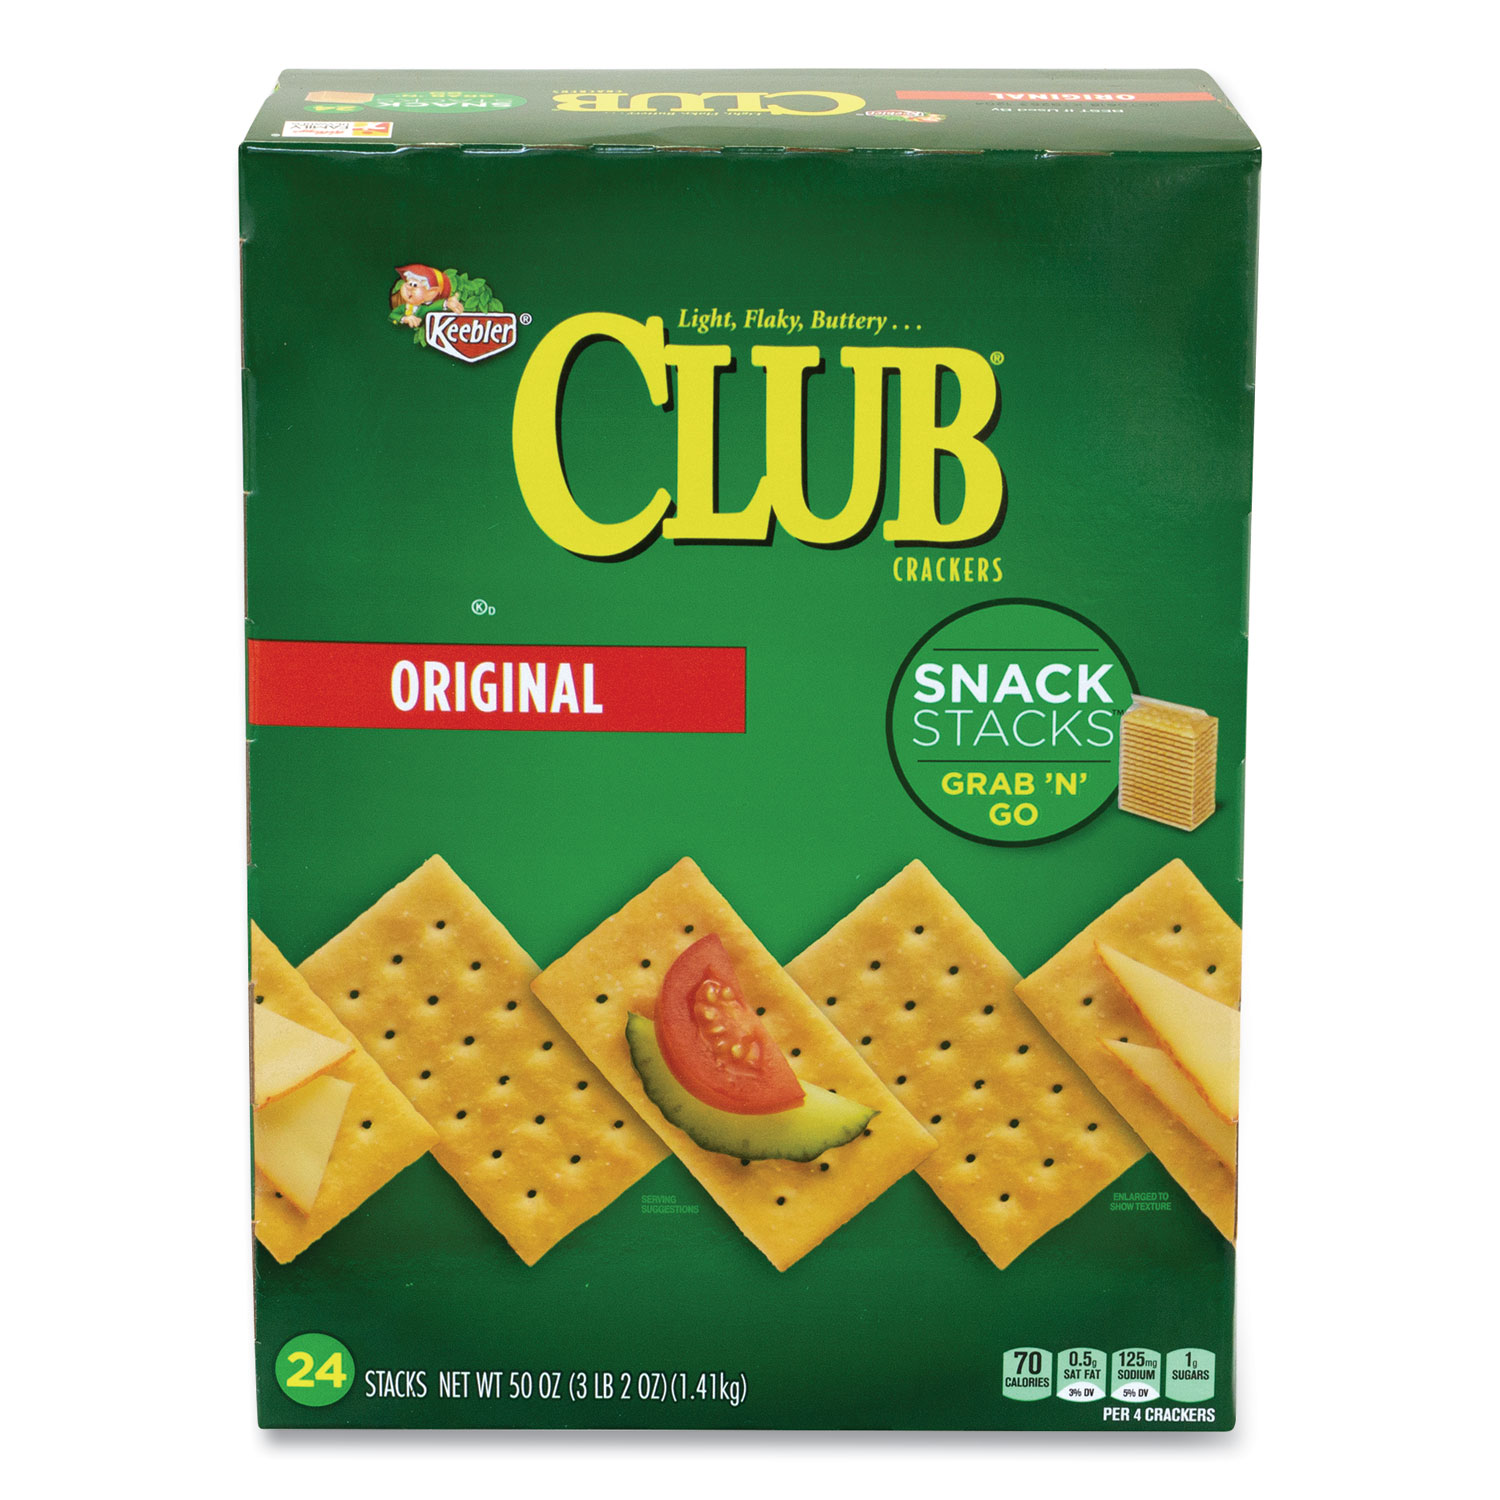  Keebler 11123 Original Club Crackers Snack Stacks, 50 oz Box, Free Delivery in 1-4 Business Days (GRR90000124) 